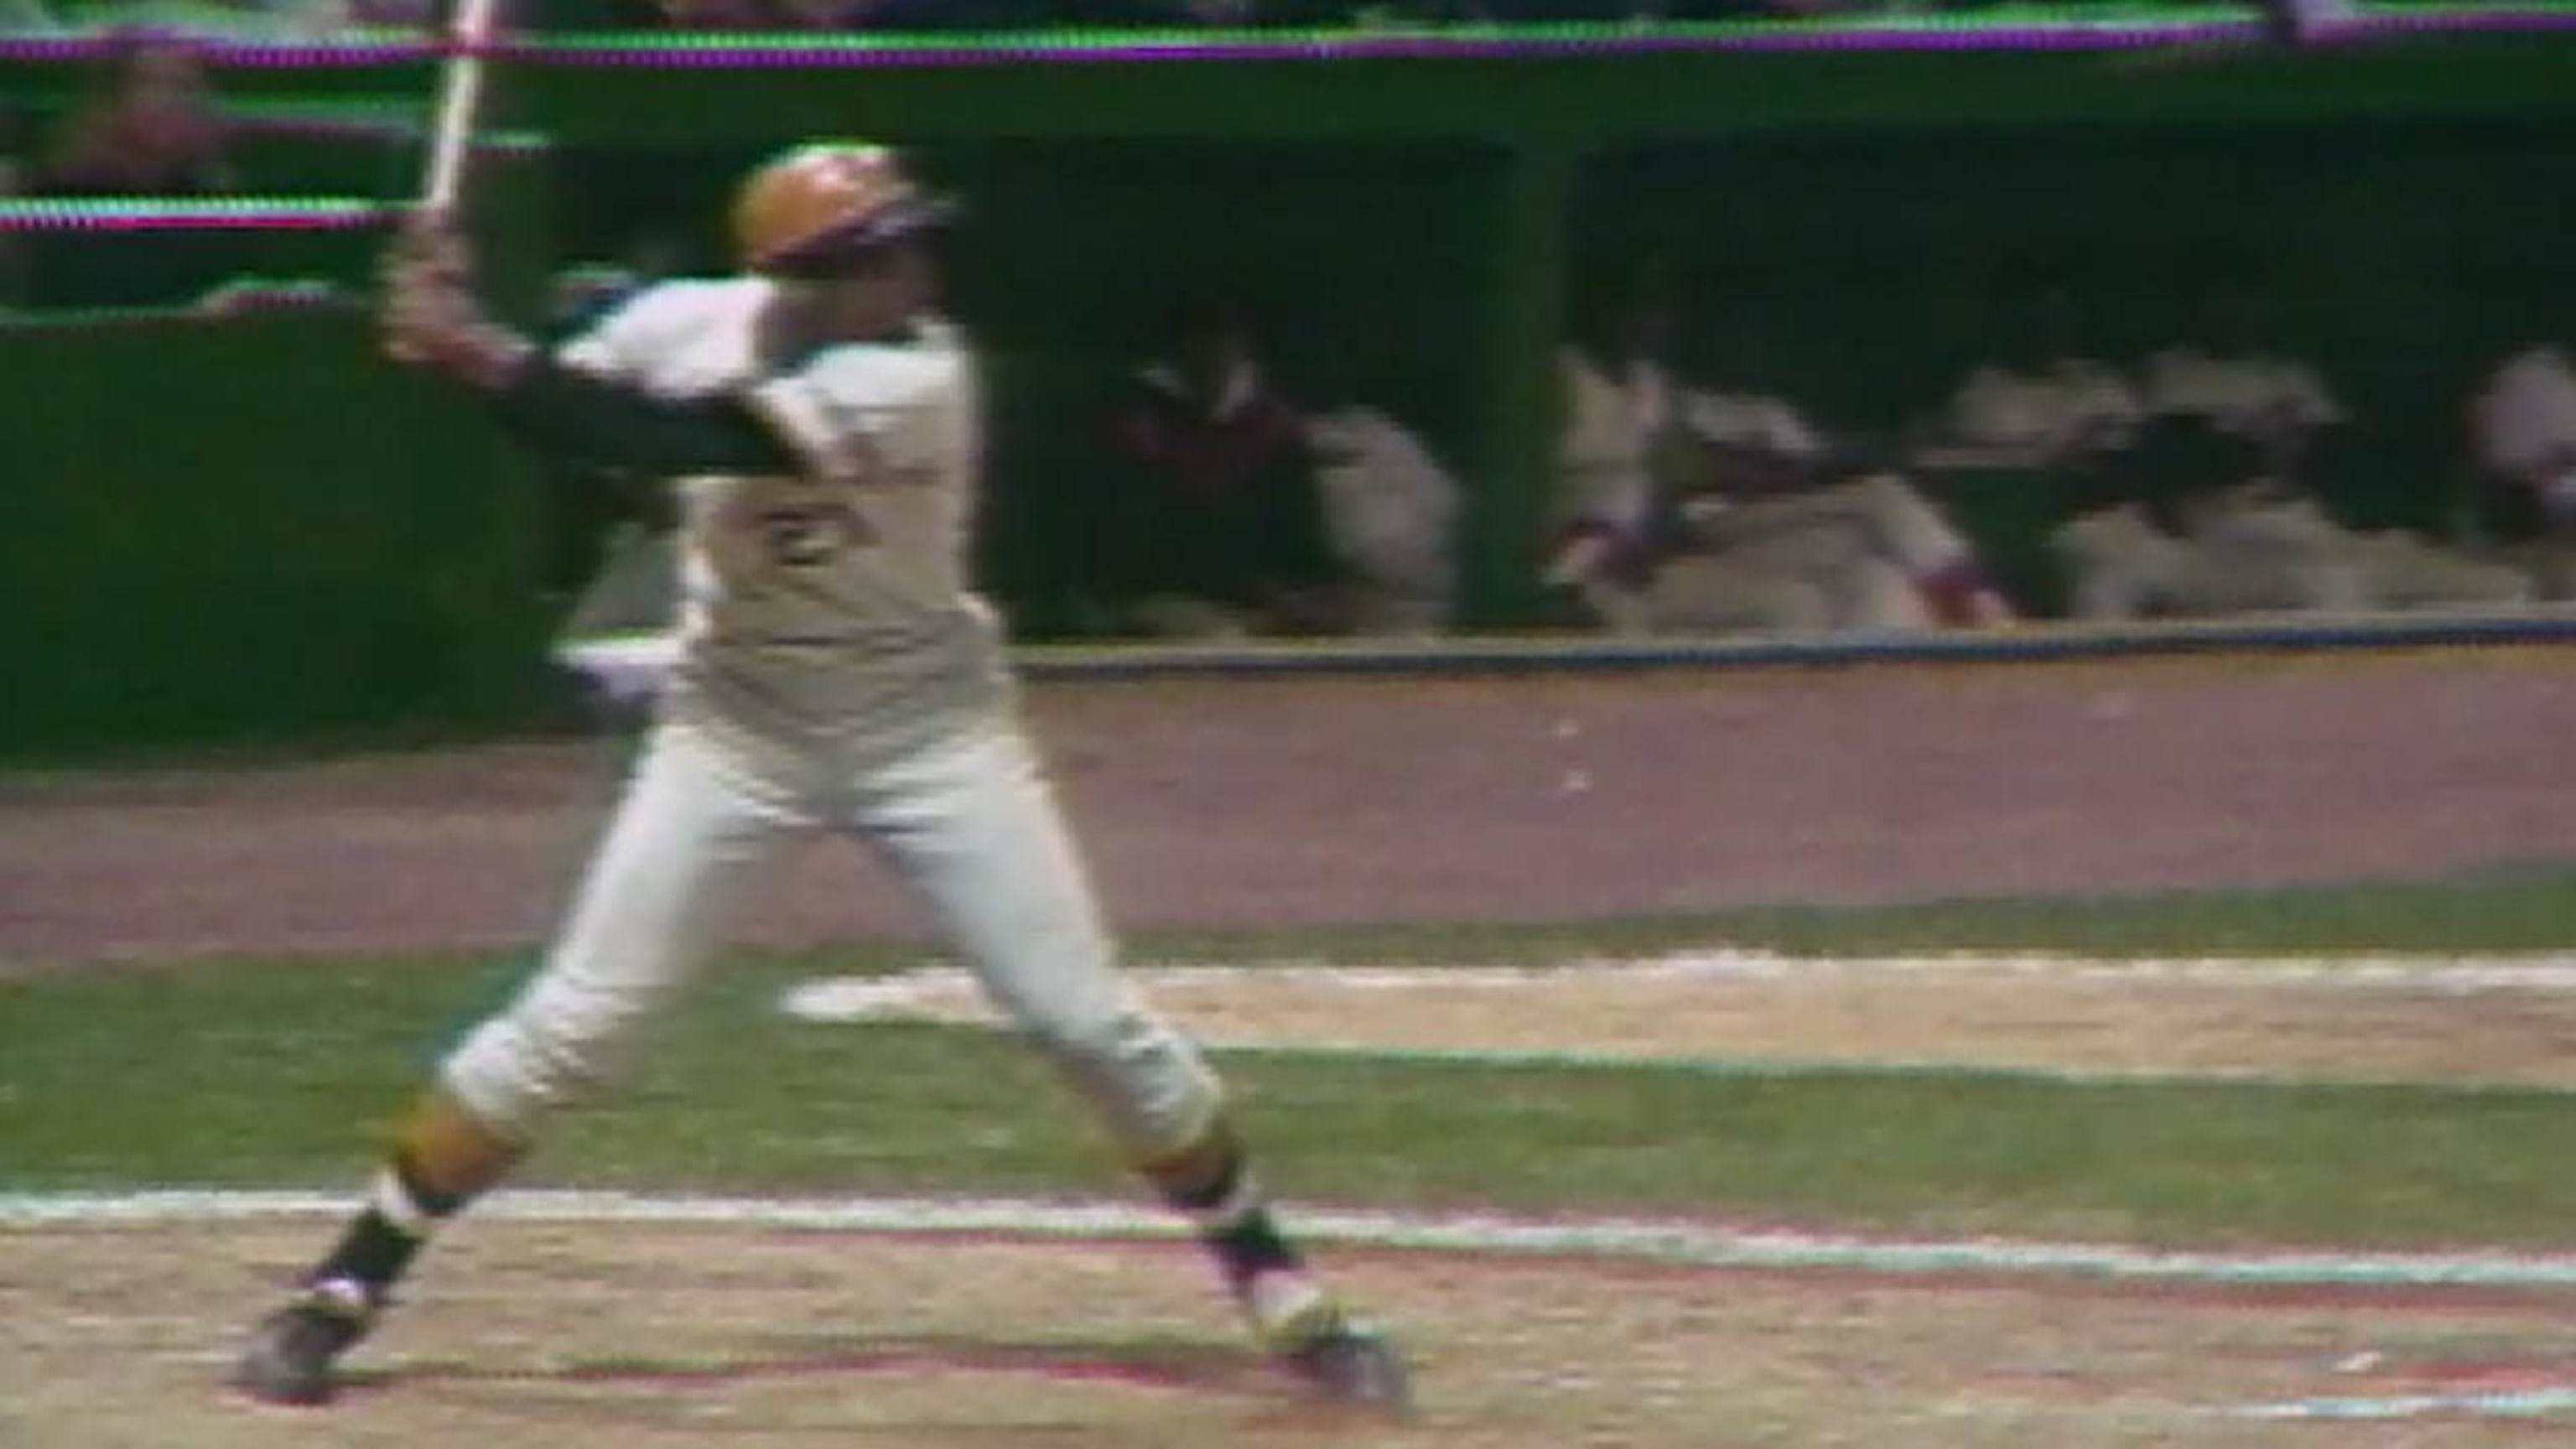 Roberto Clemente made Hall of Fame history